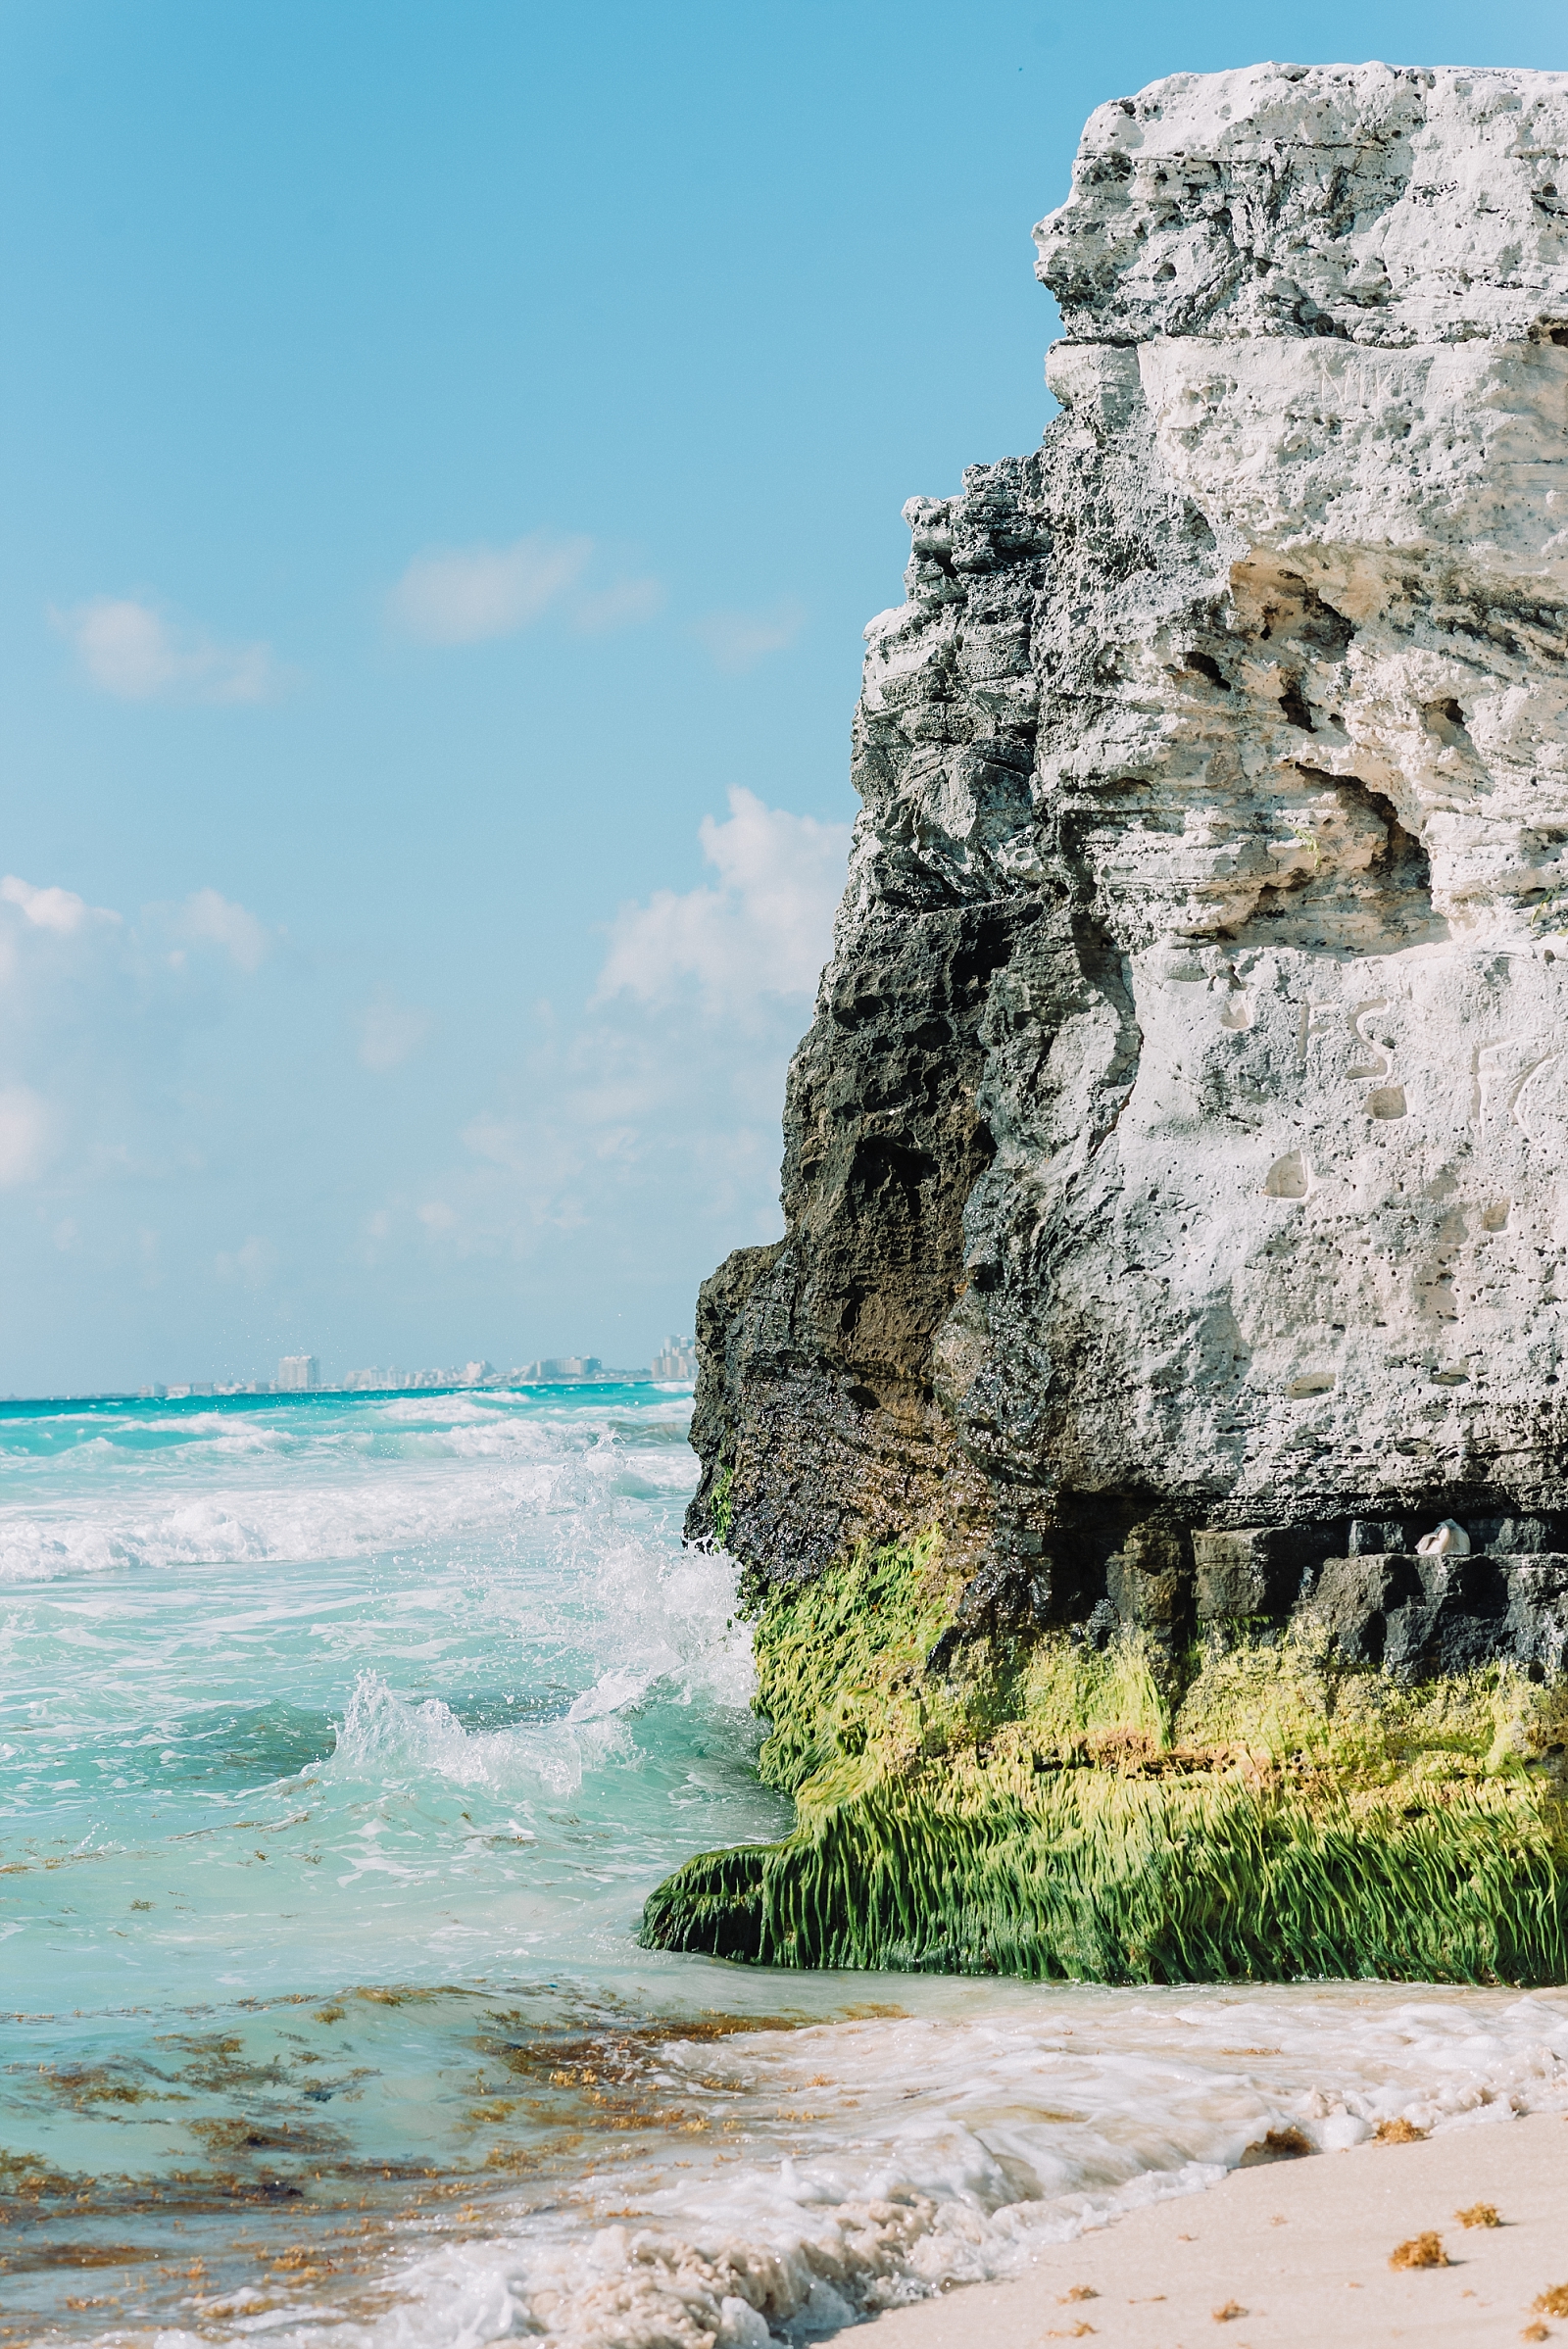 cancun beach mexico travel landscape at one of my favorite honeymoon locations